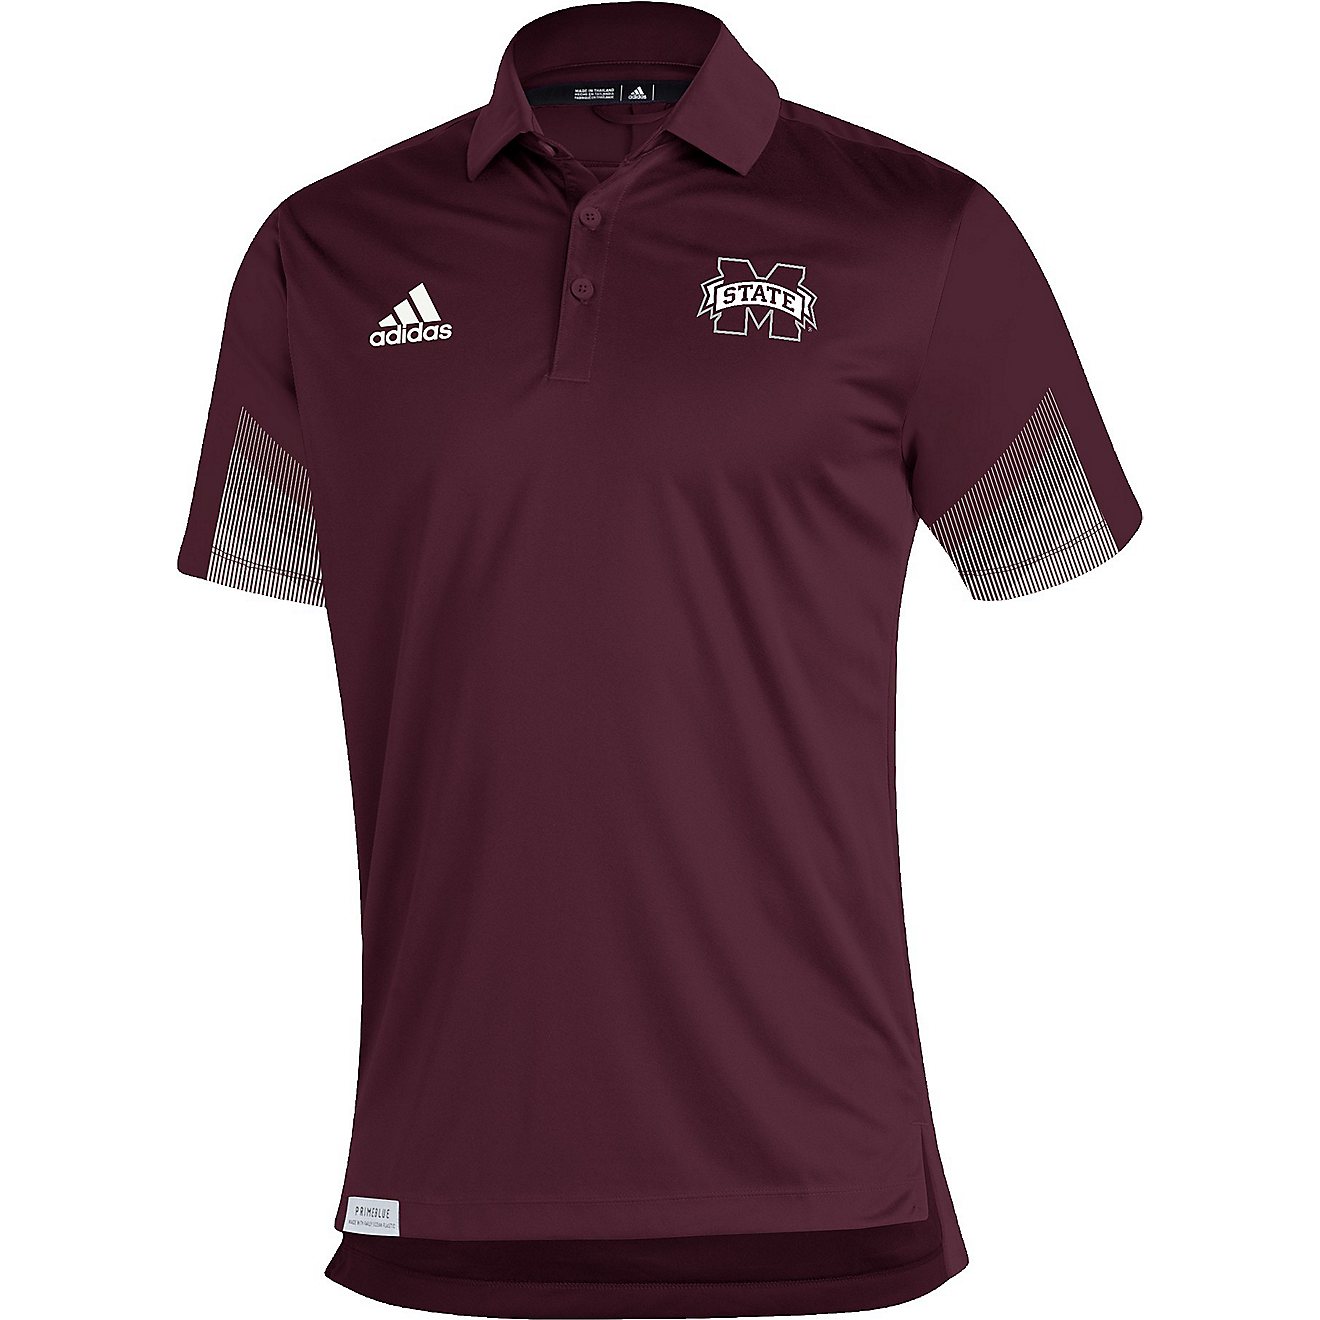 adidas Men's Mississippi State University Sideline 21 Primeblue Polo Shirt                                                       - view number 1